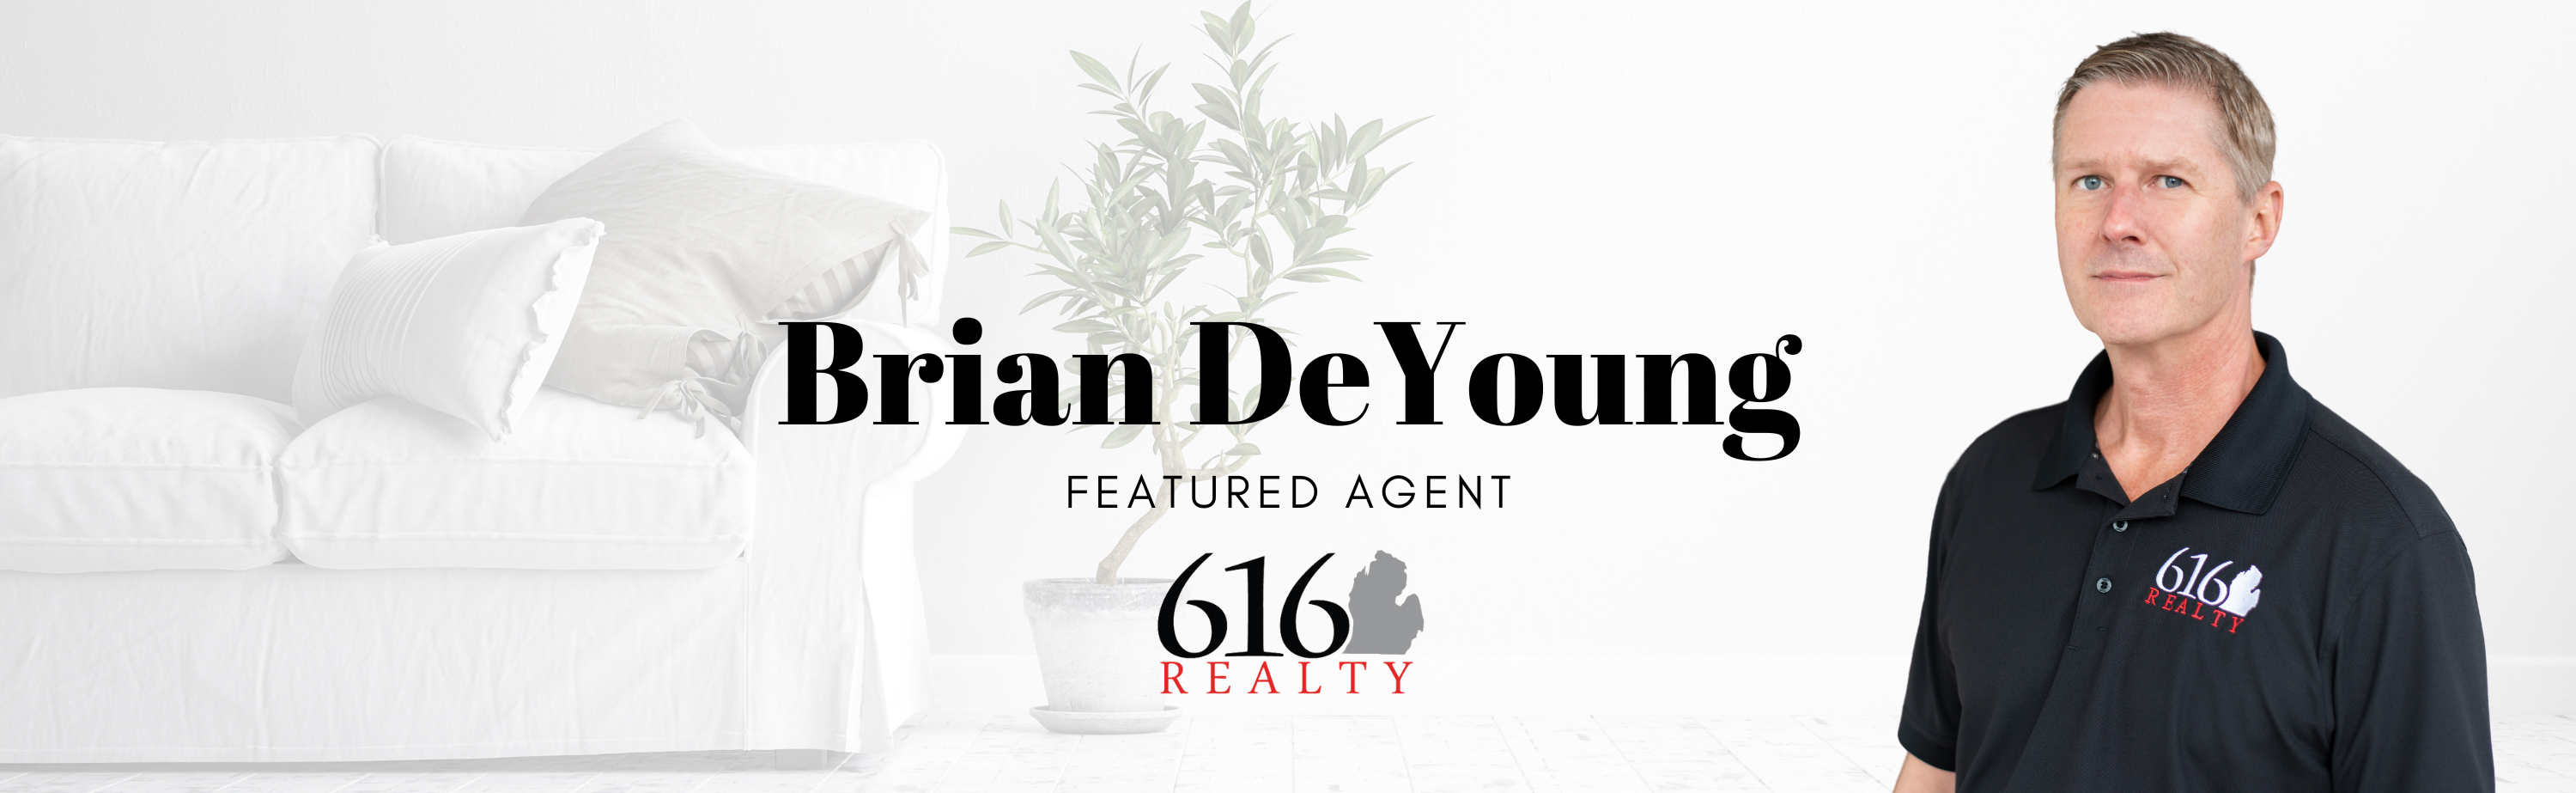 Brian Deyoung - Featured Agent